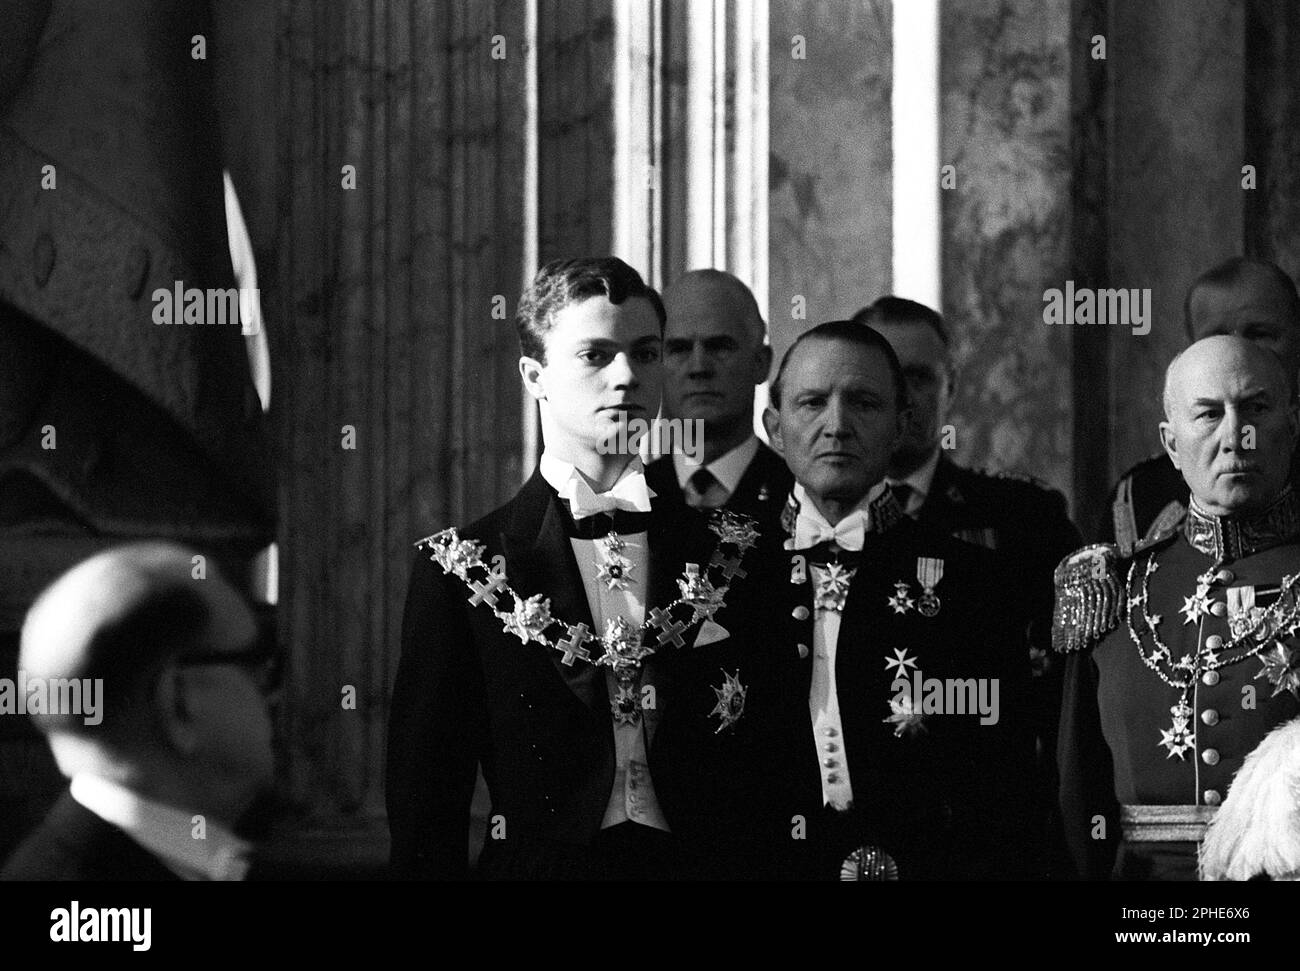 Carl XVI Gustaf, King of Sweden. Born 30 april 1946. Pictured when attending the ceremonial opening of the swedish parliament 1966. Stock Photo